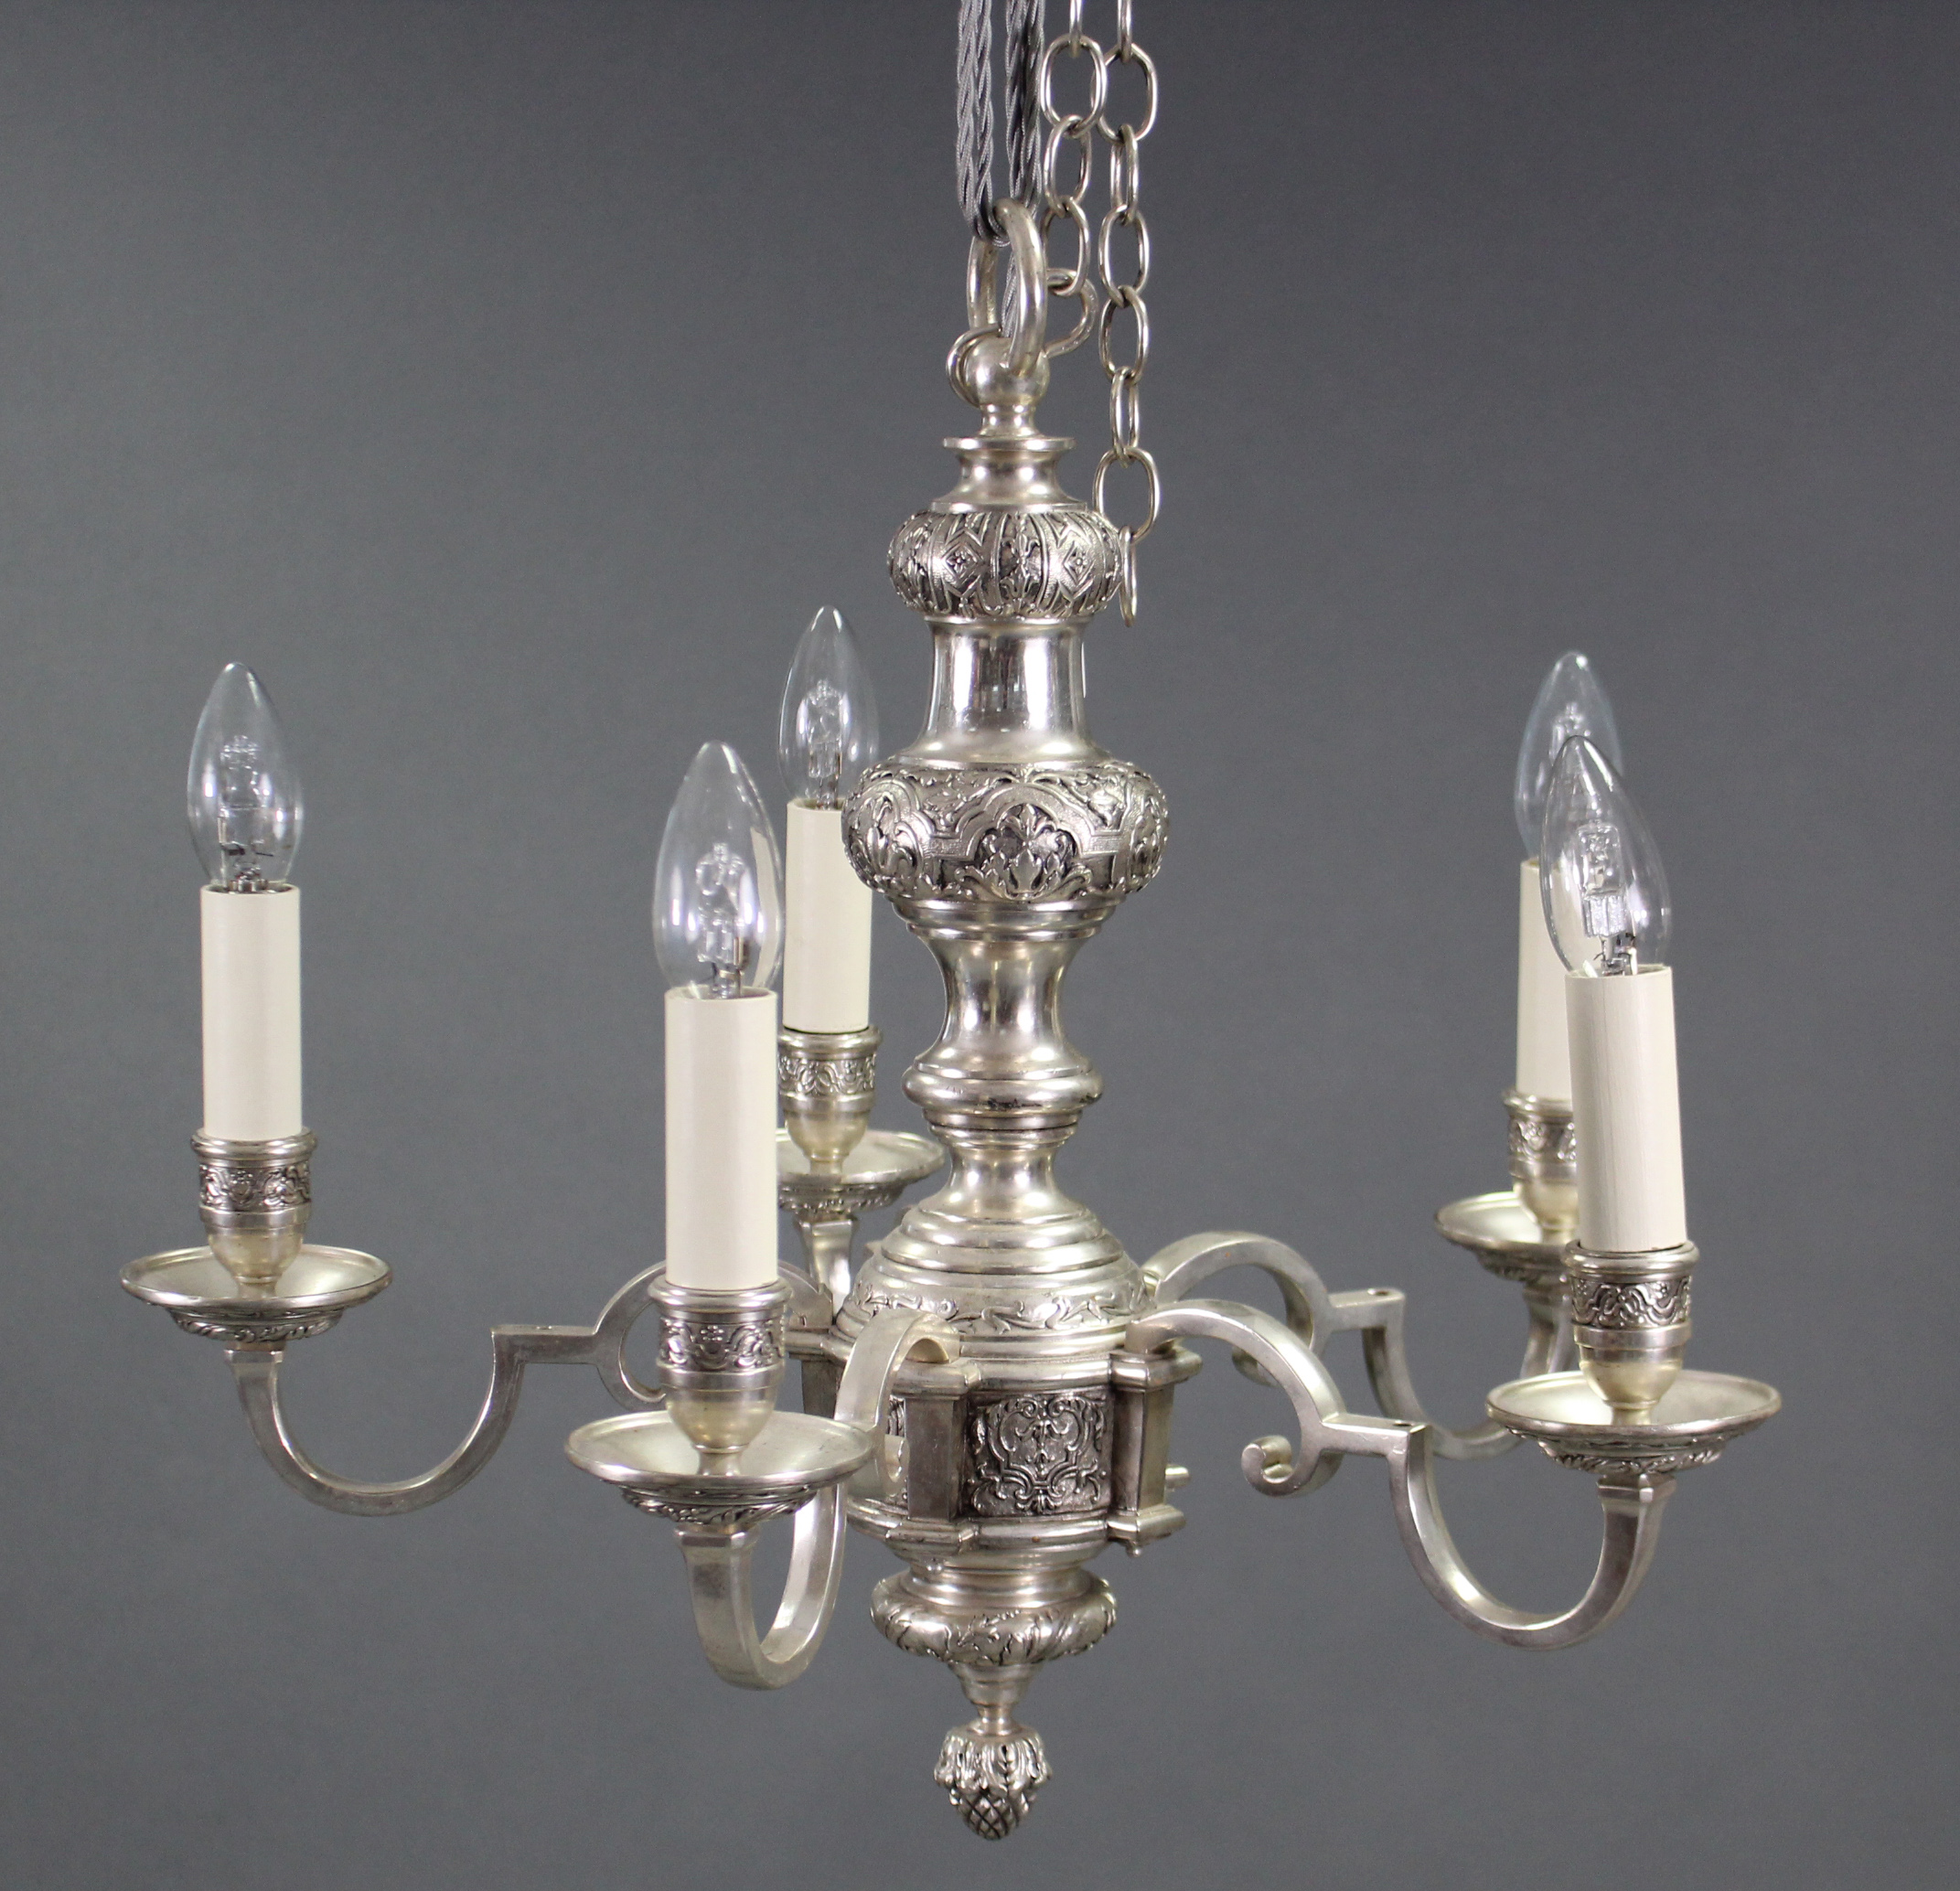 A heavy cast-metal Dutch-style six branch ceiling light fitting, with scroll arms & embossed - Image 2 of 2